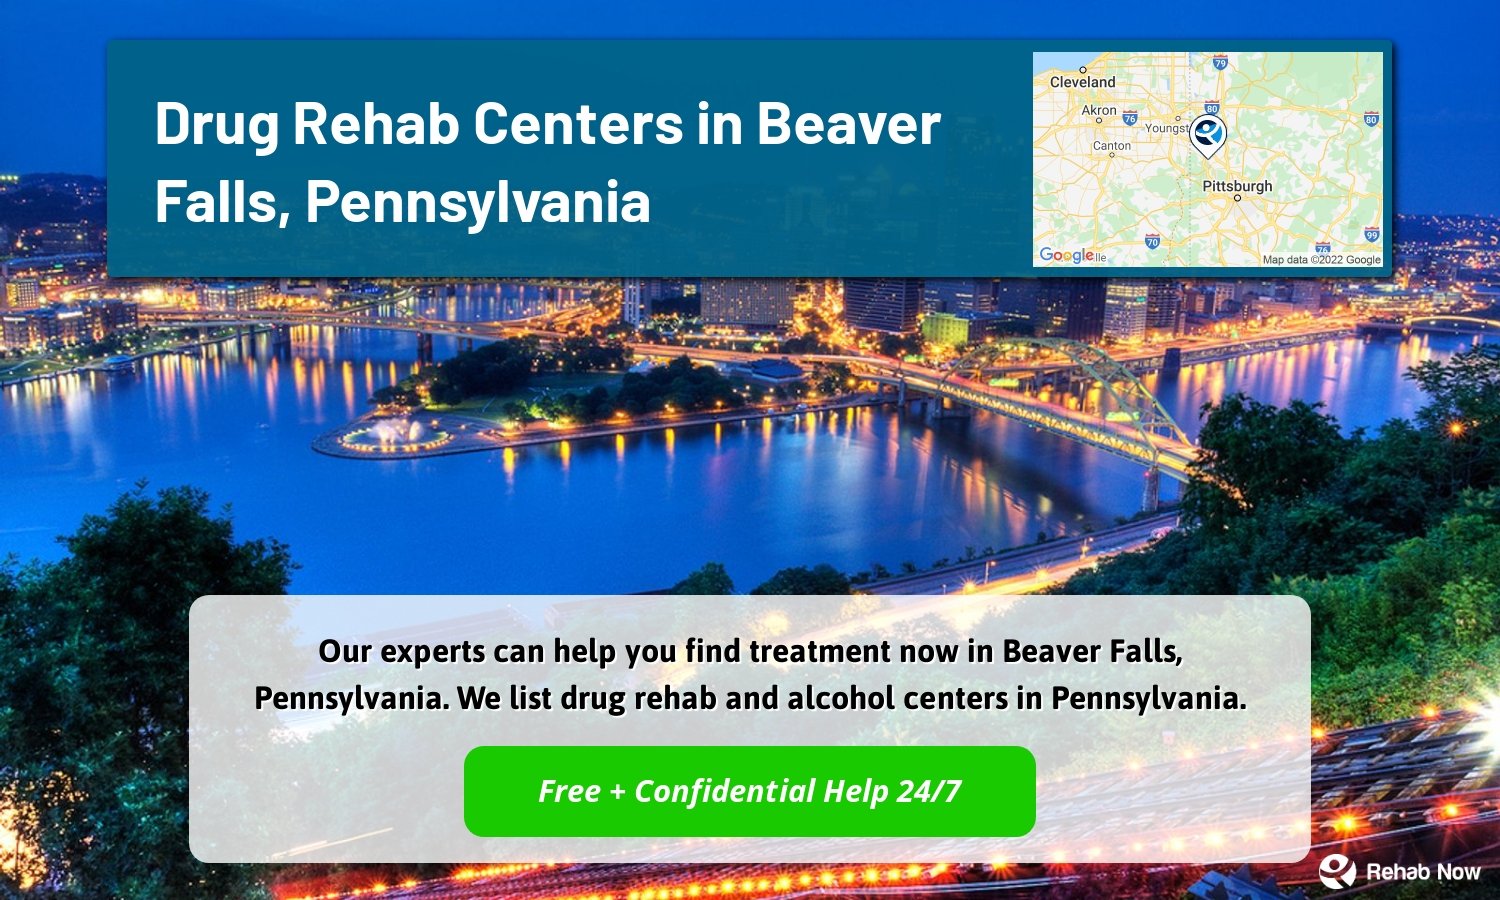 Our experts can help you find treatment now in Beaver Falls, Pennsylvania. We list drug rehab and alcohol centers in Pennsylvania.